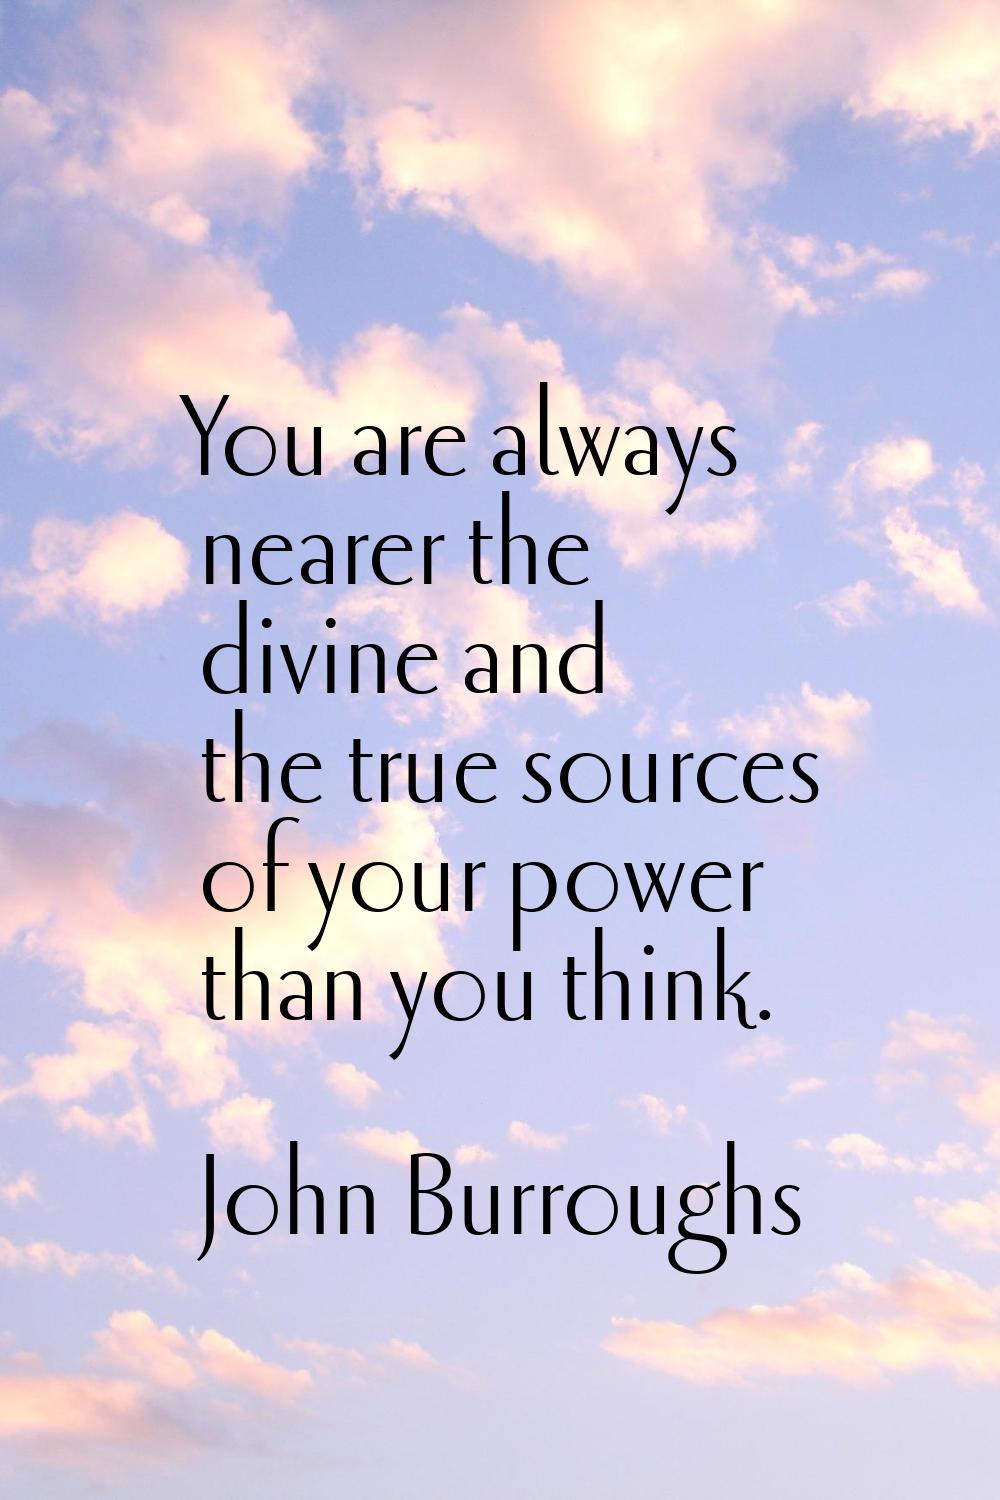 You are always nearer the divine and the true sources of your power than you think.